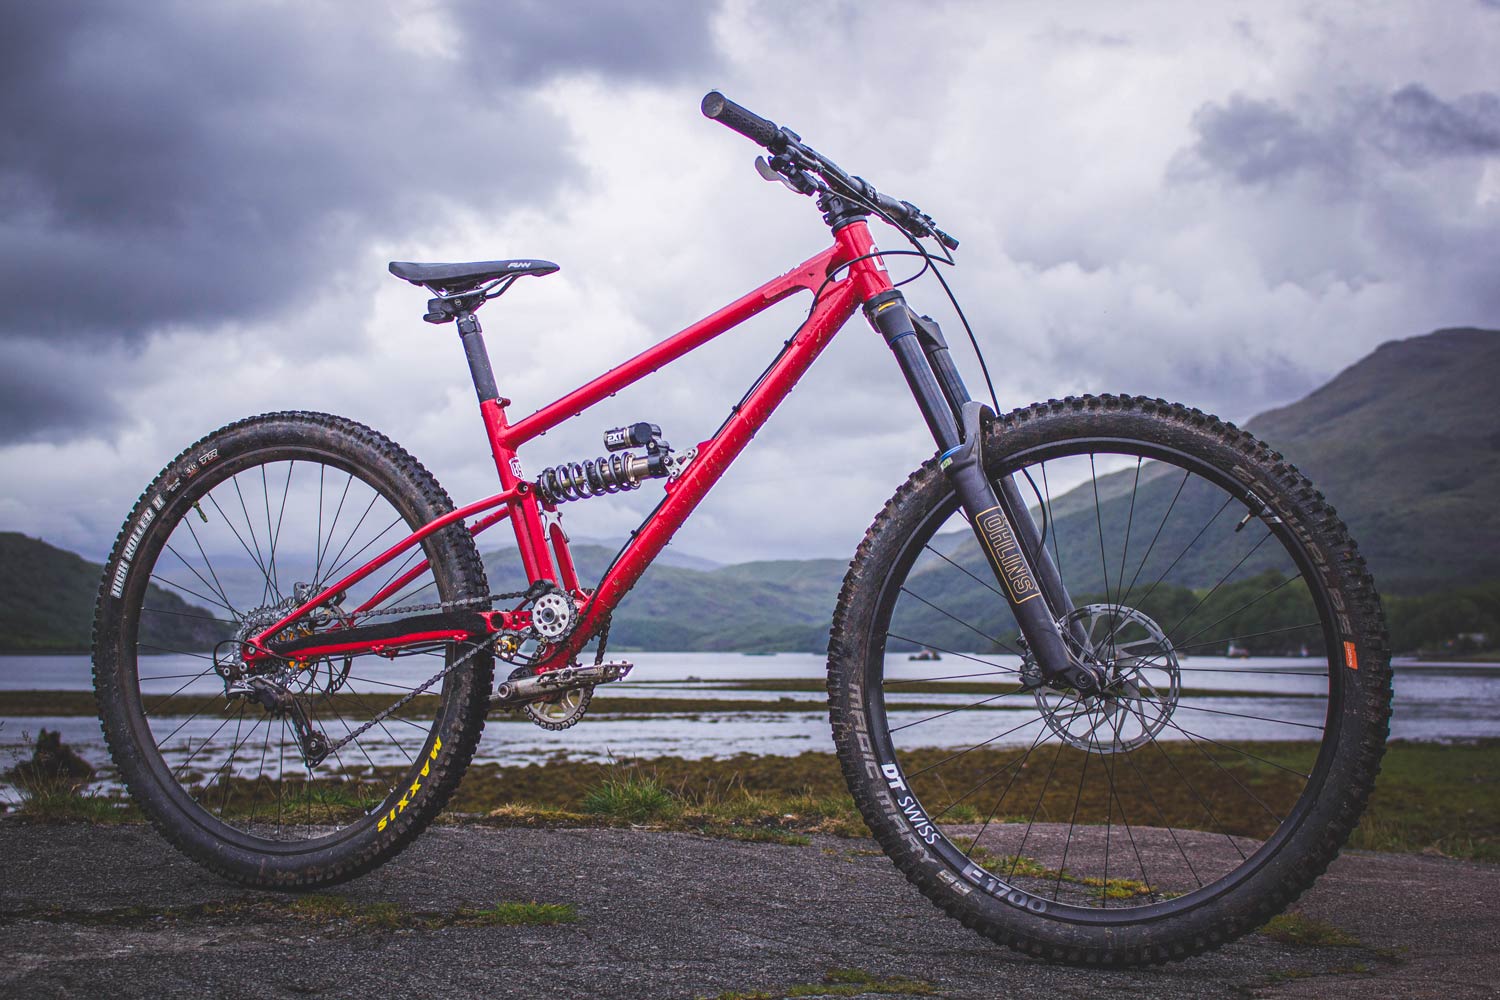 Review: <br>Starling Cycles Staer - A High Jack Pivot Prototype